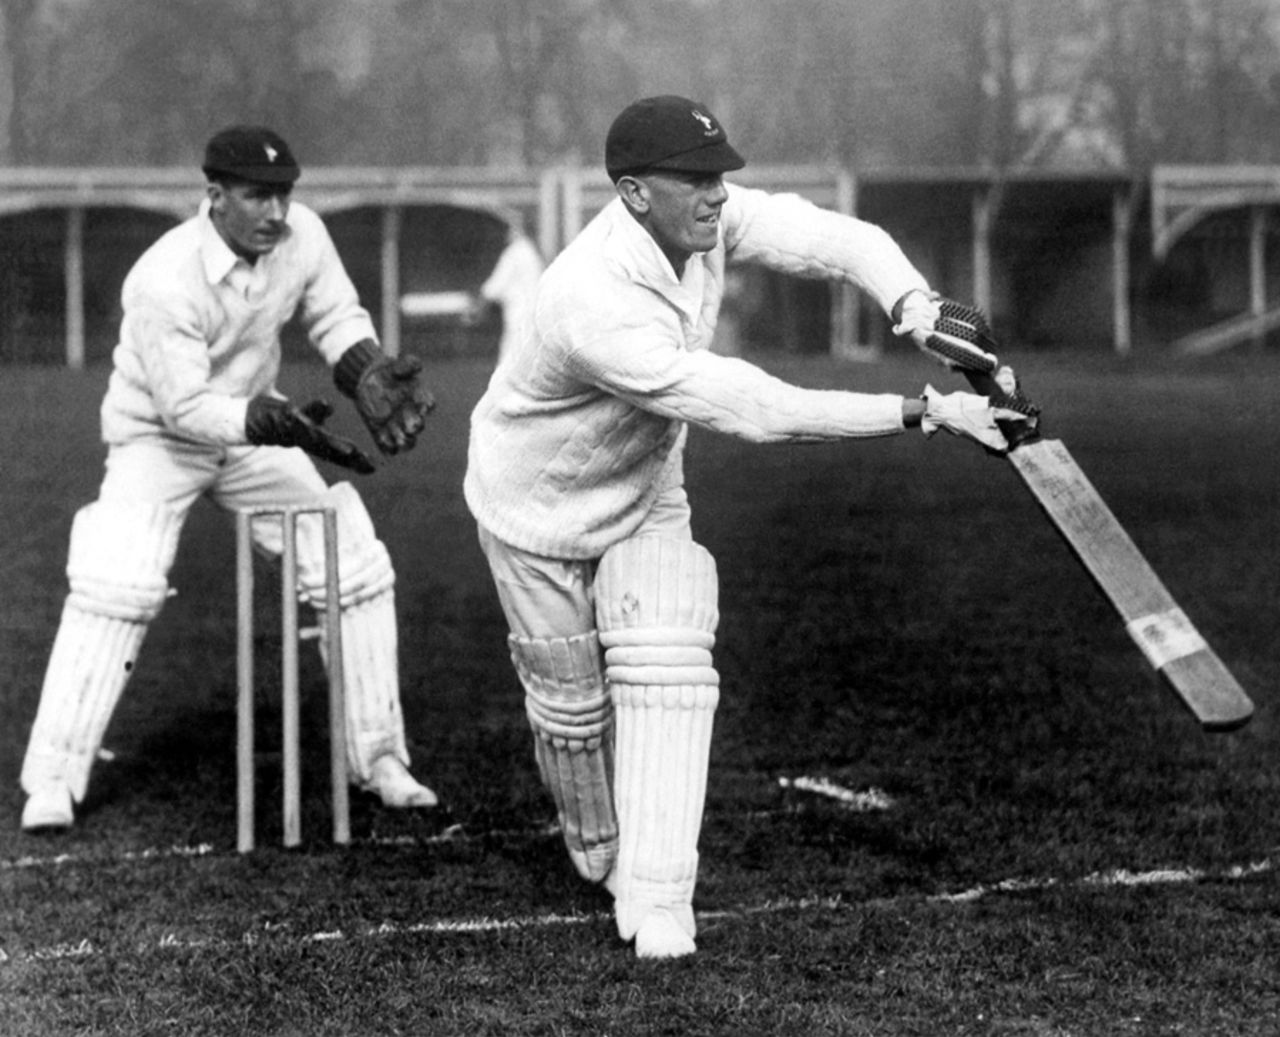 Tuppy Owen-Smith bats in the nets with Jock Cameron keeping behind the stumps, Lord's, April 27, 1929